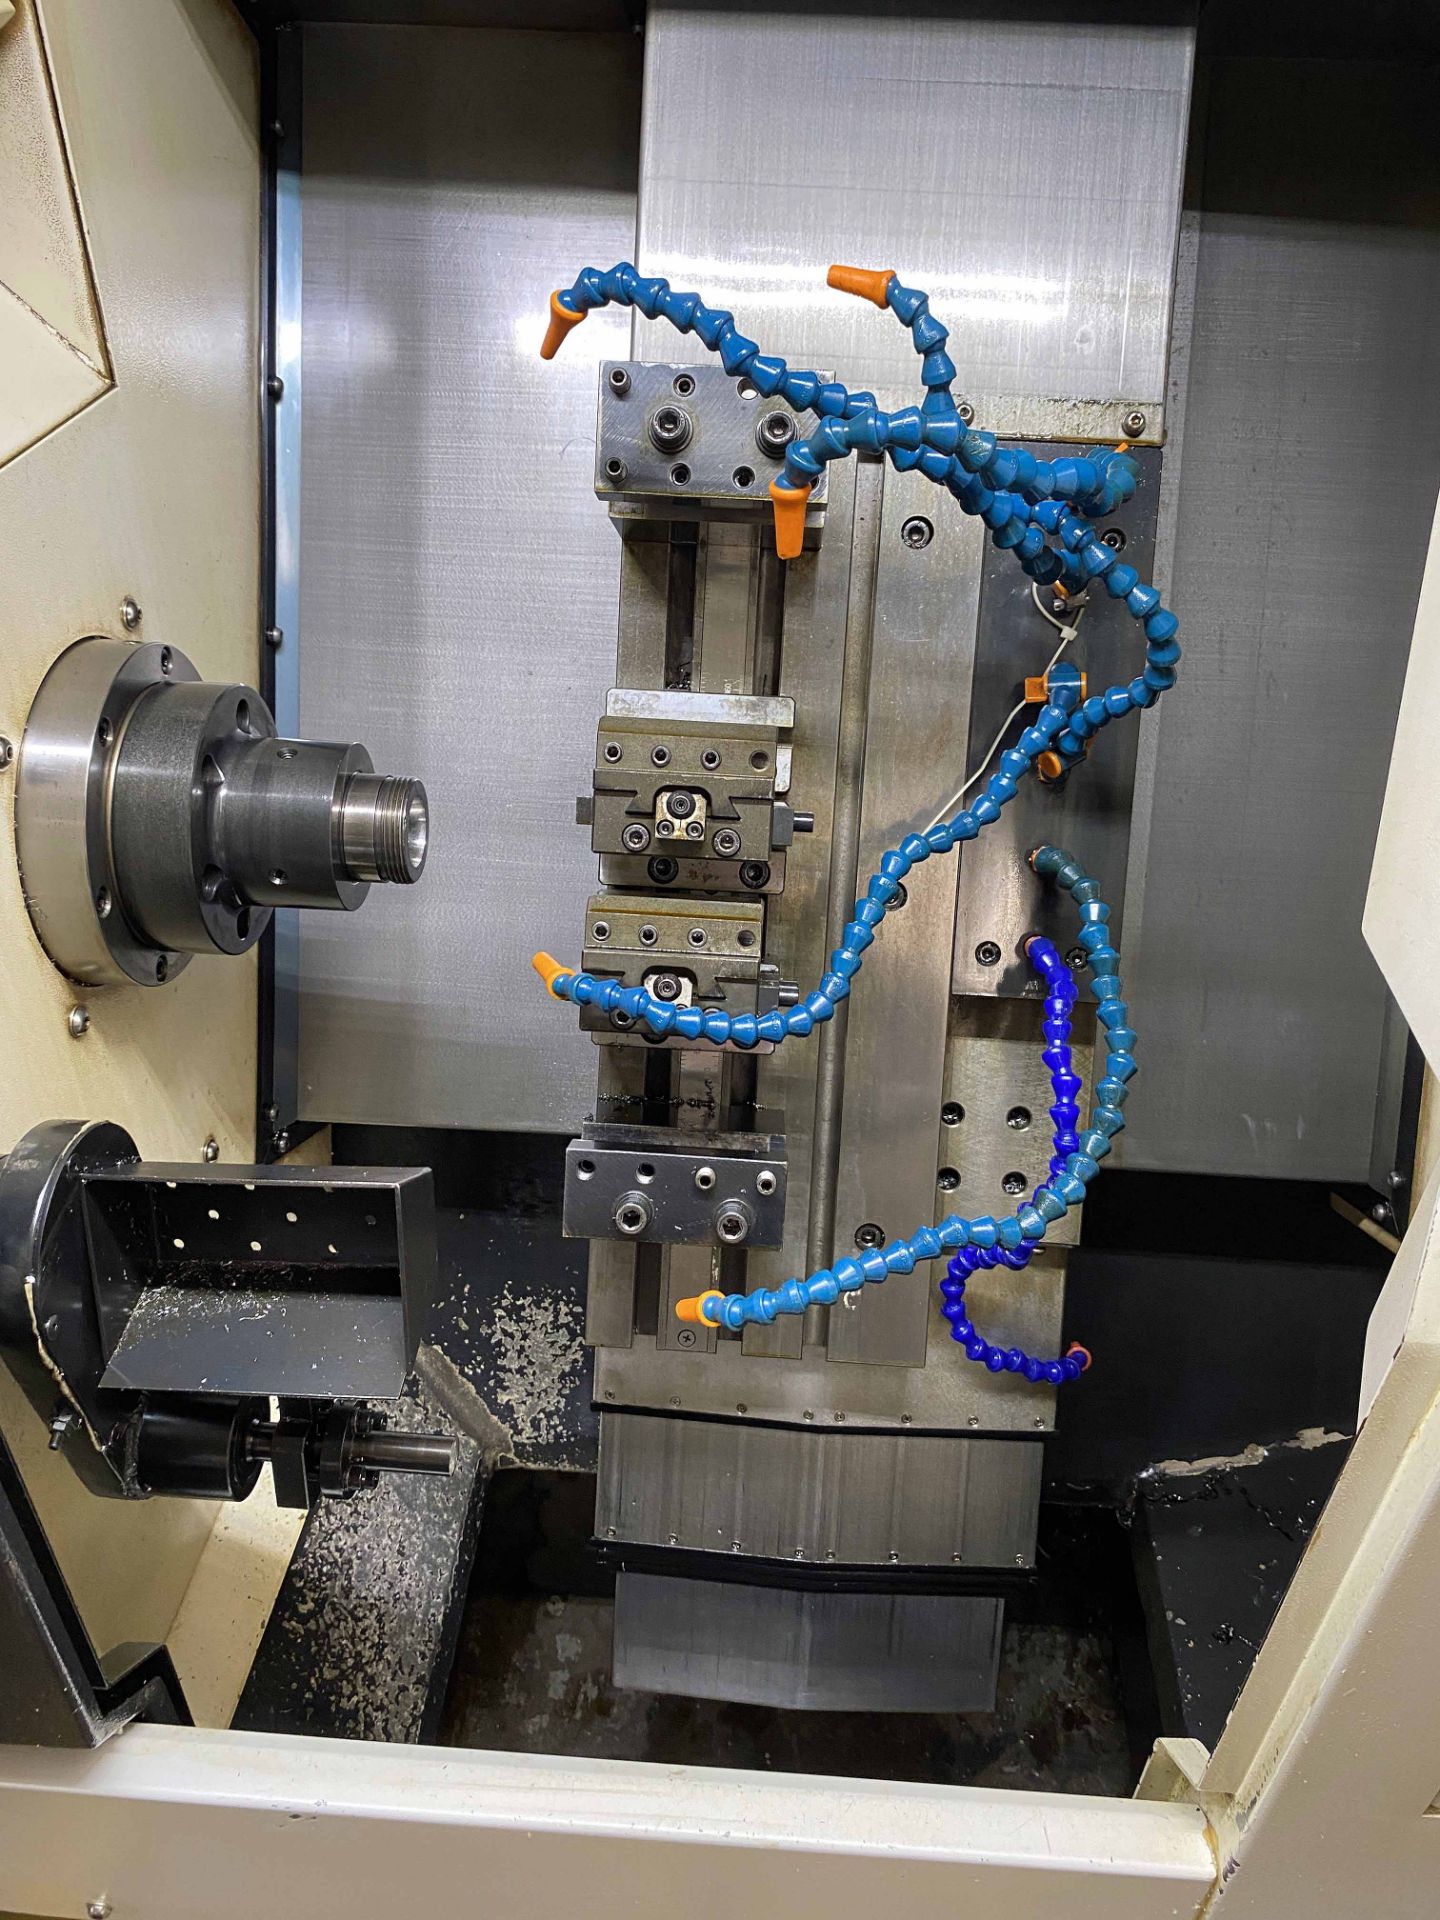 CNC LATHE, HYUNDAI WIA MDL. KIT-400, new 2012, Fanuc i Series control, collet chuck, 6-station - Image 4 of 12